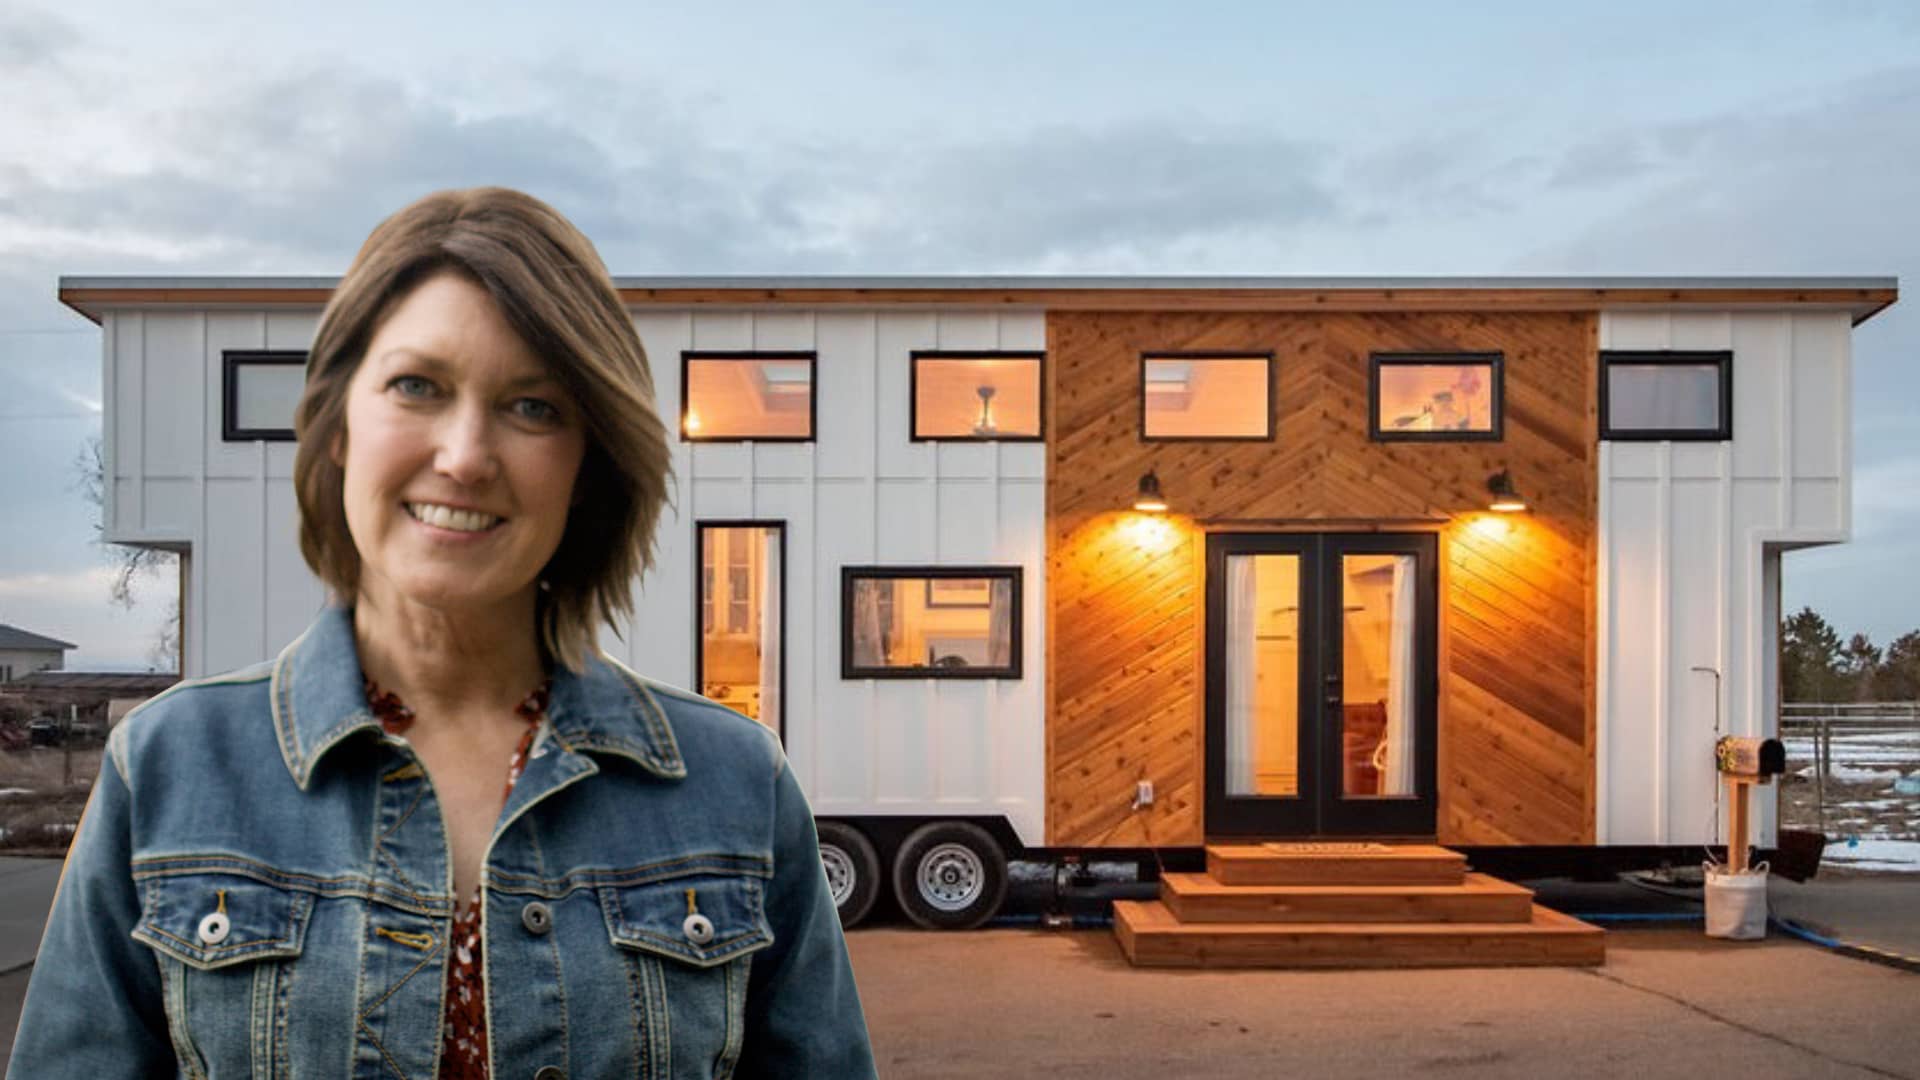 this-51-year-old-pays-$725-a-month-to-live-in-a-‘luxury-tiny-home’-in-a-backyard—take-a-look-inside